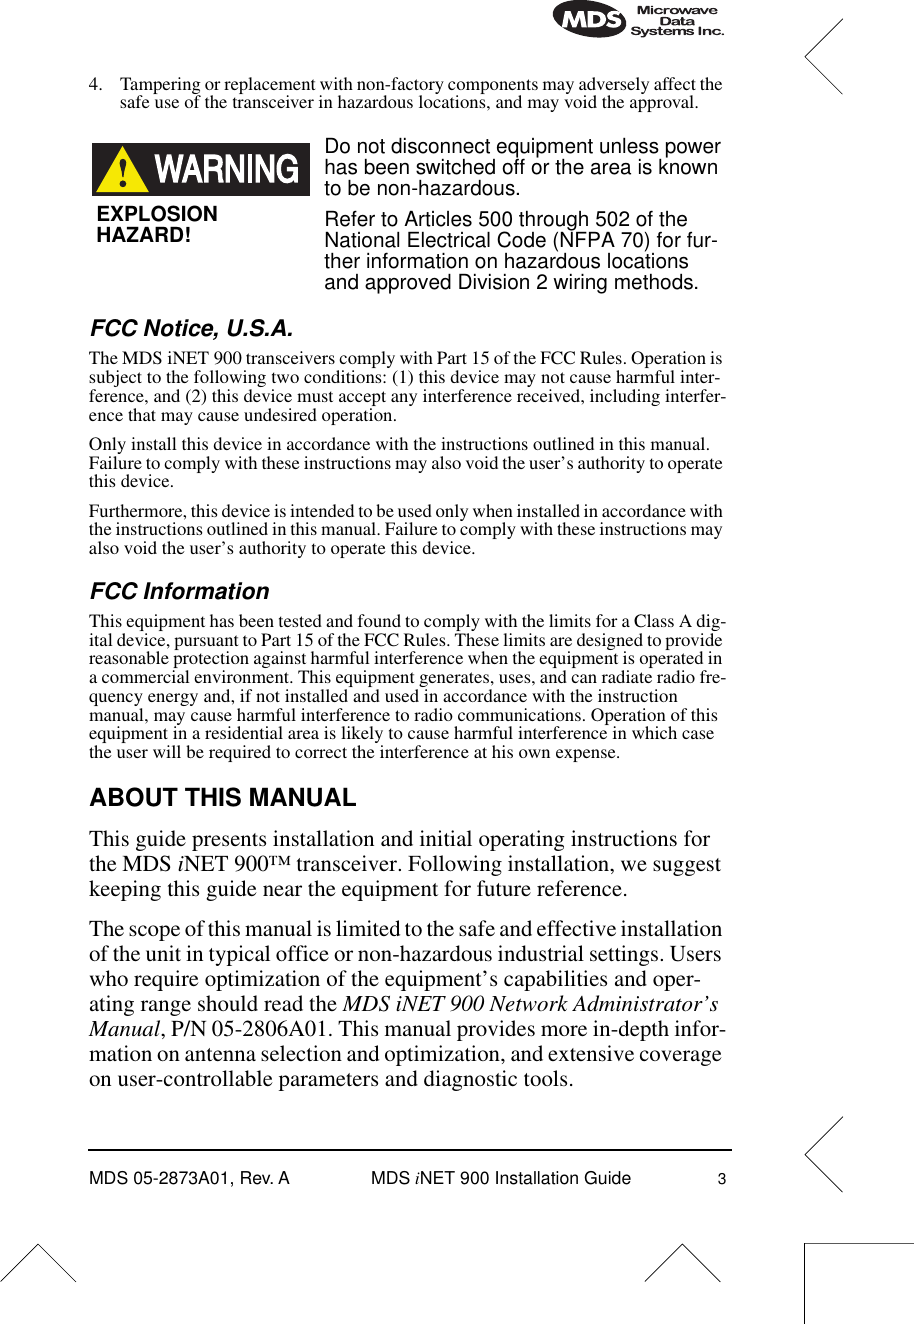  MDS 05-2873A01, Rev. A MDS  i NET 900 Installation Guide 3 4. Tampering or replacement with non-factory components may adversely affect the safe use of the transceiver in hazardous locations, and may void the approval. Do not disconnect equipment unless power has been switched off or the area is known to be non-hazardous.Refer to Articles 500 through 502 of the National Electrical Code (NFPA 70) for fur-ther information on hazardous locations and approved Division 2 wiring methods.  FCC Notice, U.S.A. The MDS iNET 900 transceivers comply with Part 15 of the FCC Rules. Operation is subject to the following two conditions: (1) this device may not cause harmful inter-ference, and (2) this device must accept any interference received, including interfer-ence that may cause undesired operation.Only install this device in accordance with the instructions outlined in this manual. Failure to comply with these instructions may also void the user’s authority to operate this device.Furthermore, this device is intended to be used only when installed in accordance with the instructions outlined in this manual. Failure to comply with these instructions may also void the user’s authority to operate this device. FCC Information This equipment has been tested and found to comply with the limits for a Class A dig-ital device, pursuant to Part 15 of the FCC Rules. These limits are designed to provide reasonable protection against harmful interference when the equipment is operated in a commercial environment. This equipment generates, uses, and can radiate radio fre-quency energy and, if not installed and used in accordance with the instruction manual, may cause harmful interference to radio communications. Operation of this equipment in a residential area is likely to cause harmful interference in which case the user will be required to correct the interference at his own expense. ABOUT THIS MANUAL This guide presents installation and initial operating instructions for the MDS  i NET 900™ transceiver. Following installation, we suggest keeping this guide near the equipment for future reference.The scope of this manual is limited to the safe and effective installation of the unit in typical office or non-hazardous industrial settings. Users who require optimization of the equipment’s capabilities and oper-ating range should read the  MDS iNET 900 Network Administrator’s Manual , P/N 05-2806A01. This manual provides more in-depth infor-mation on antenna selection and optimization, and extensive coverage on user-controllable parameters and diagnostic tools.EXPLOSIONHAZARD!